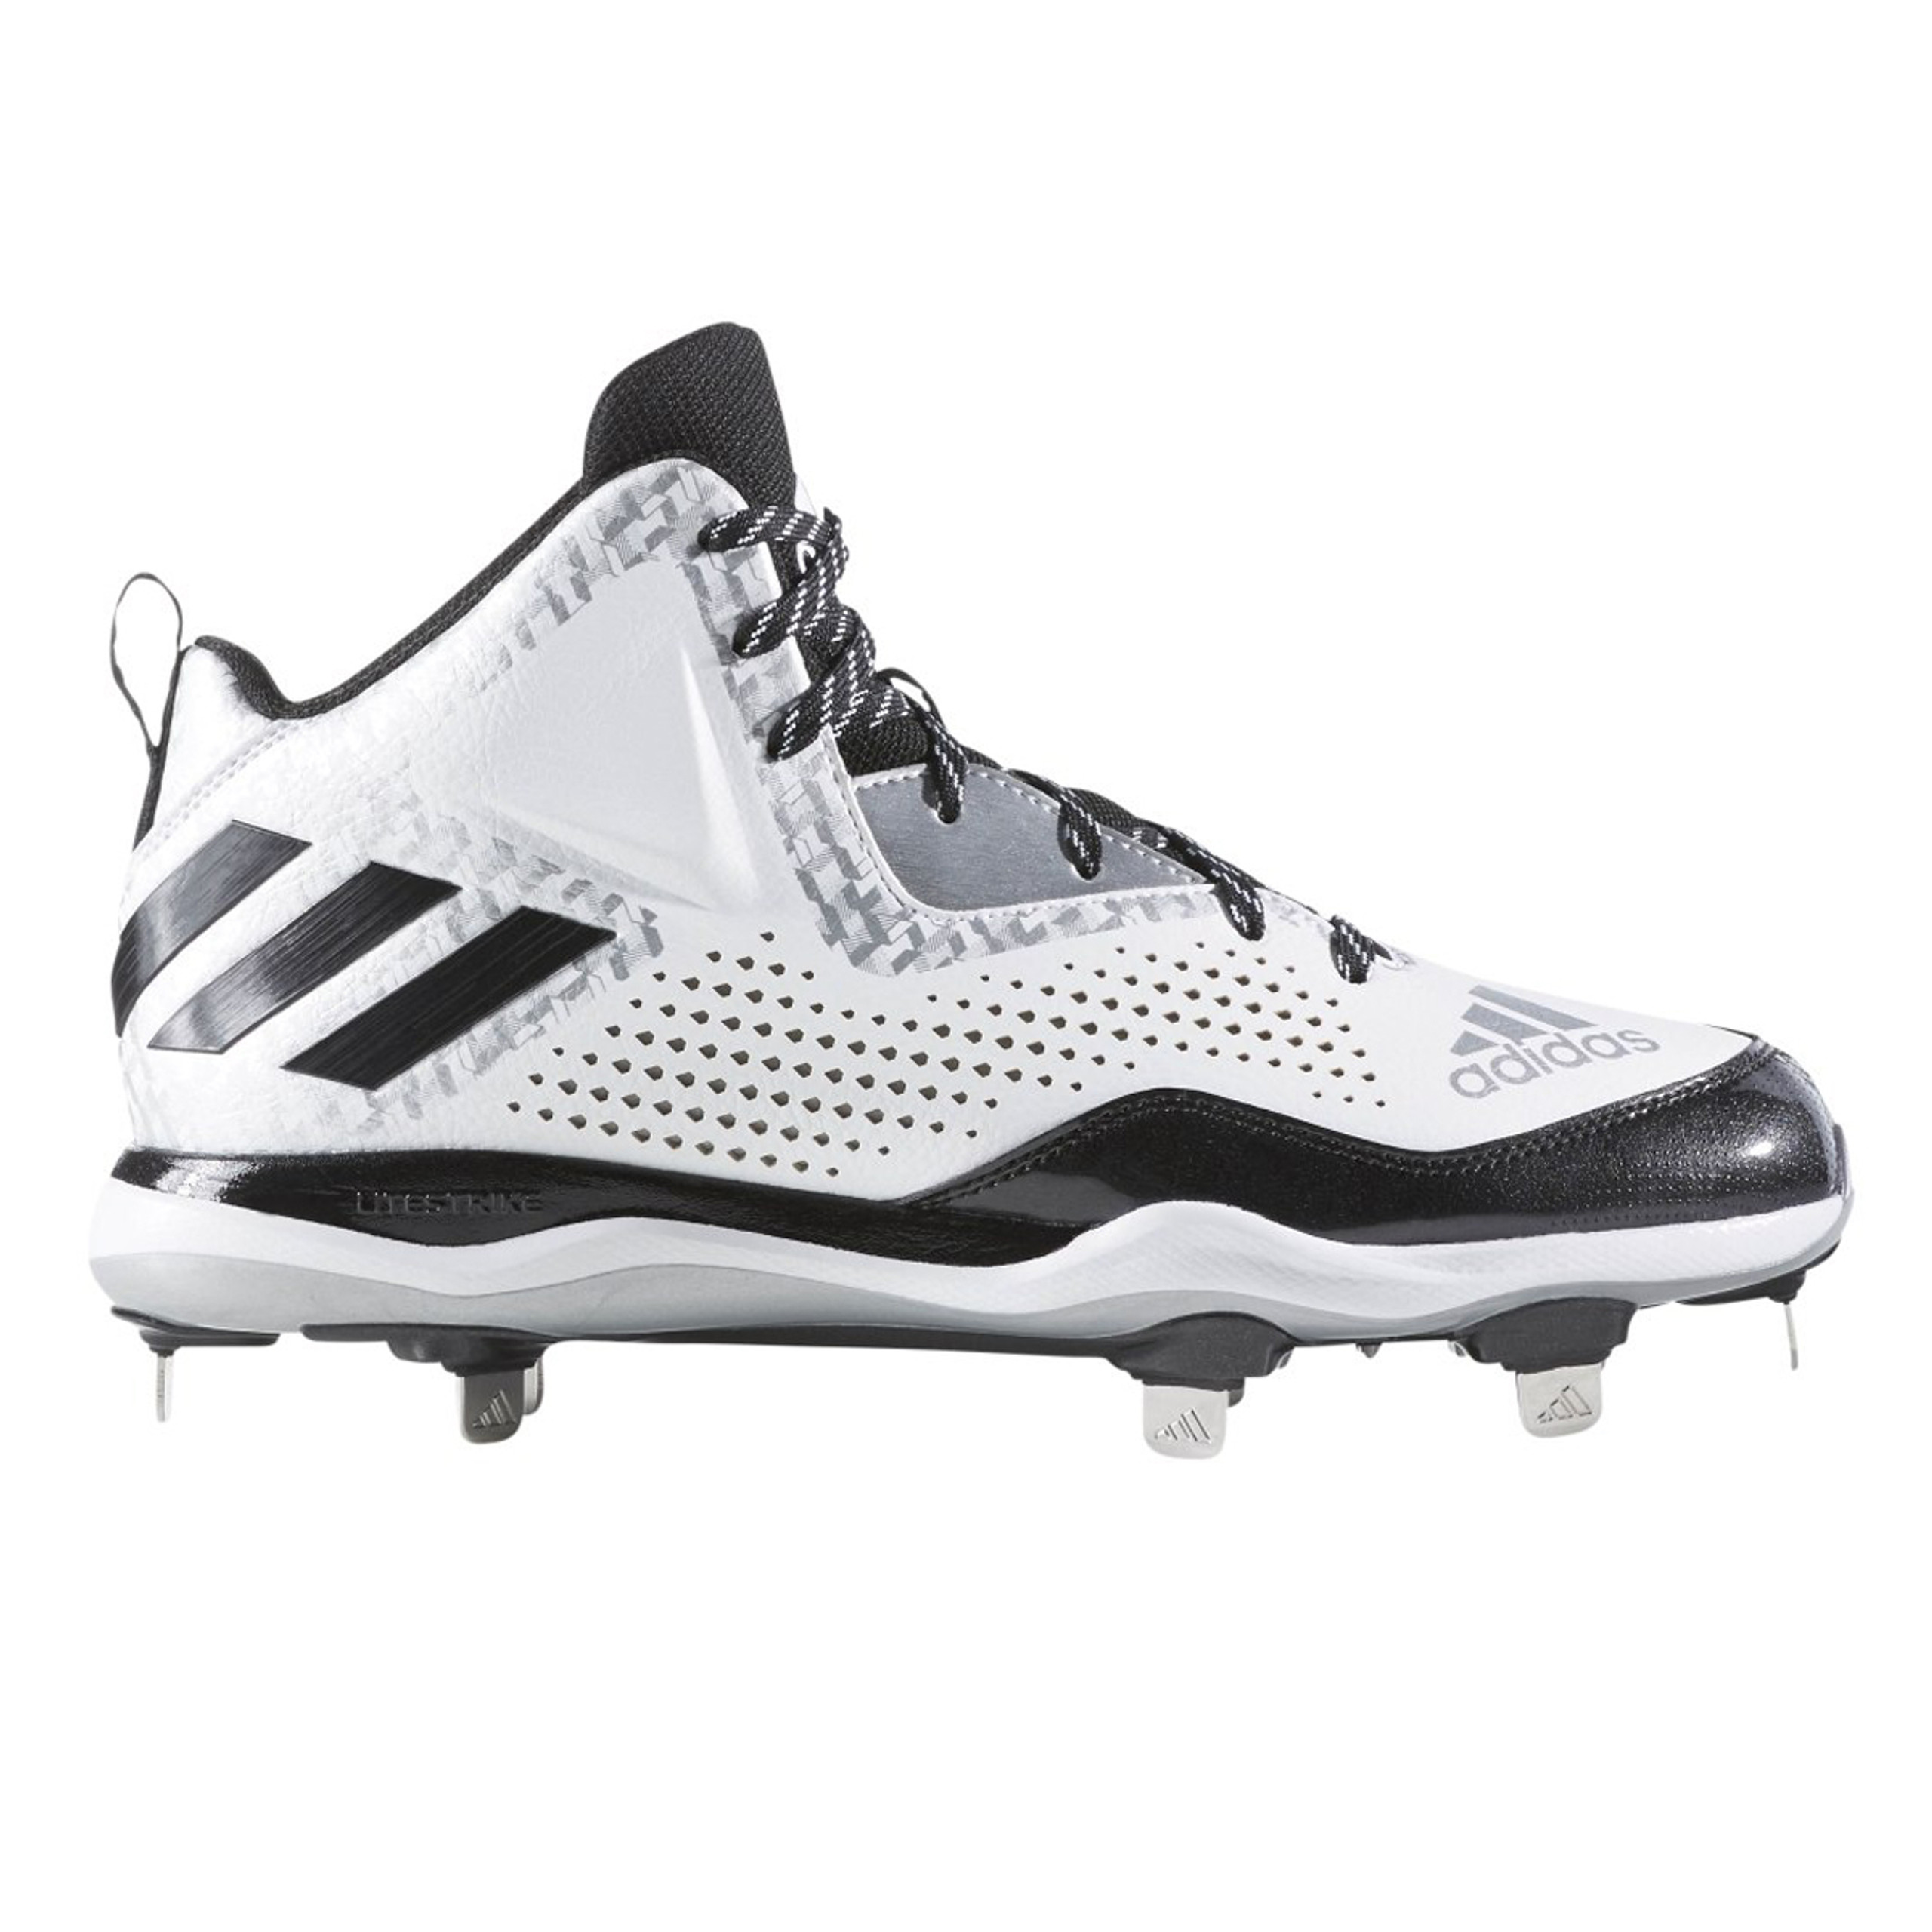 Adidas Power Alley 5 Cleats | Men's Baseball Cleats for Sale